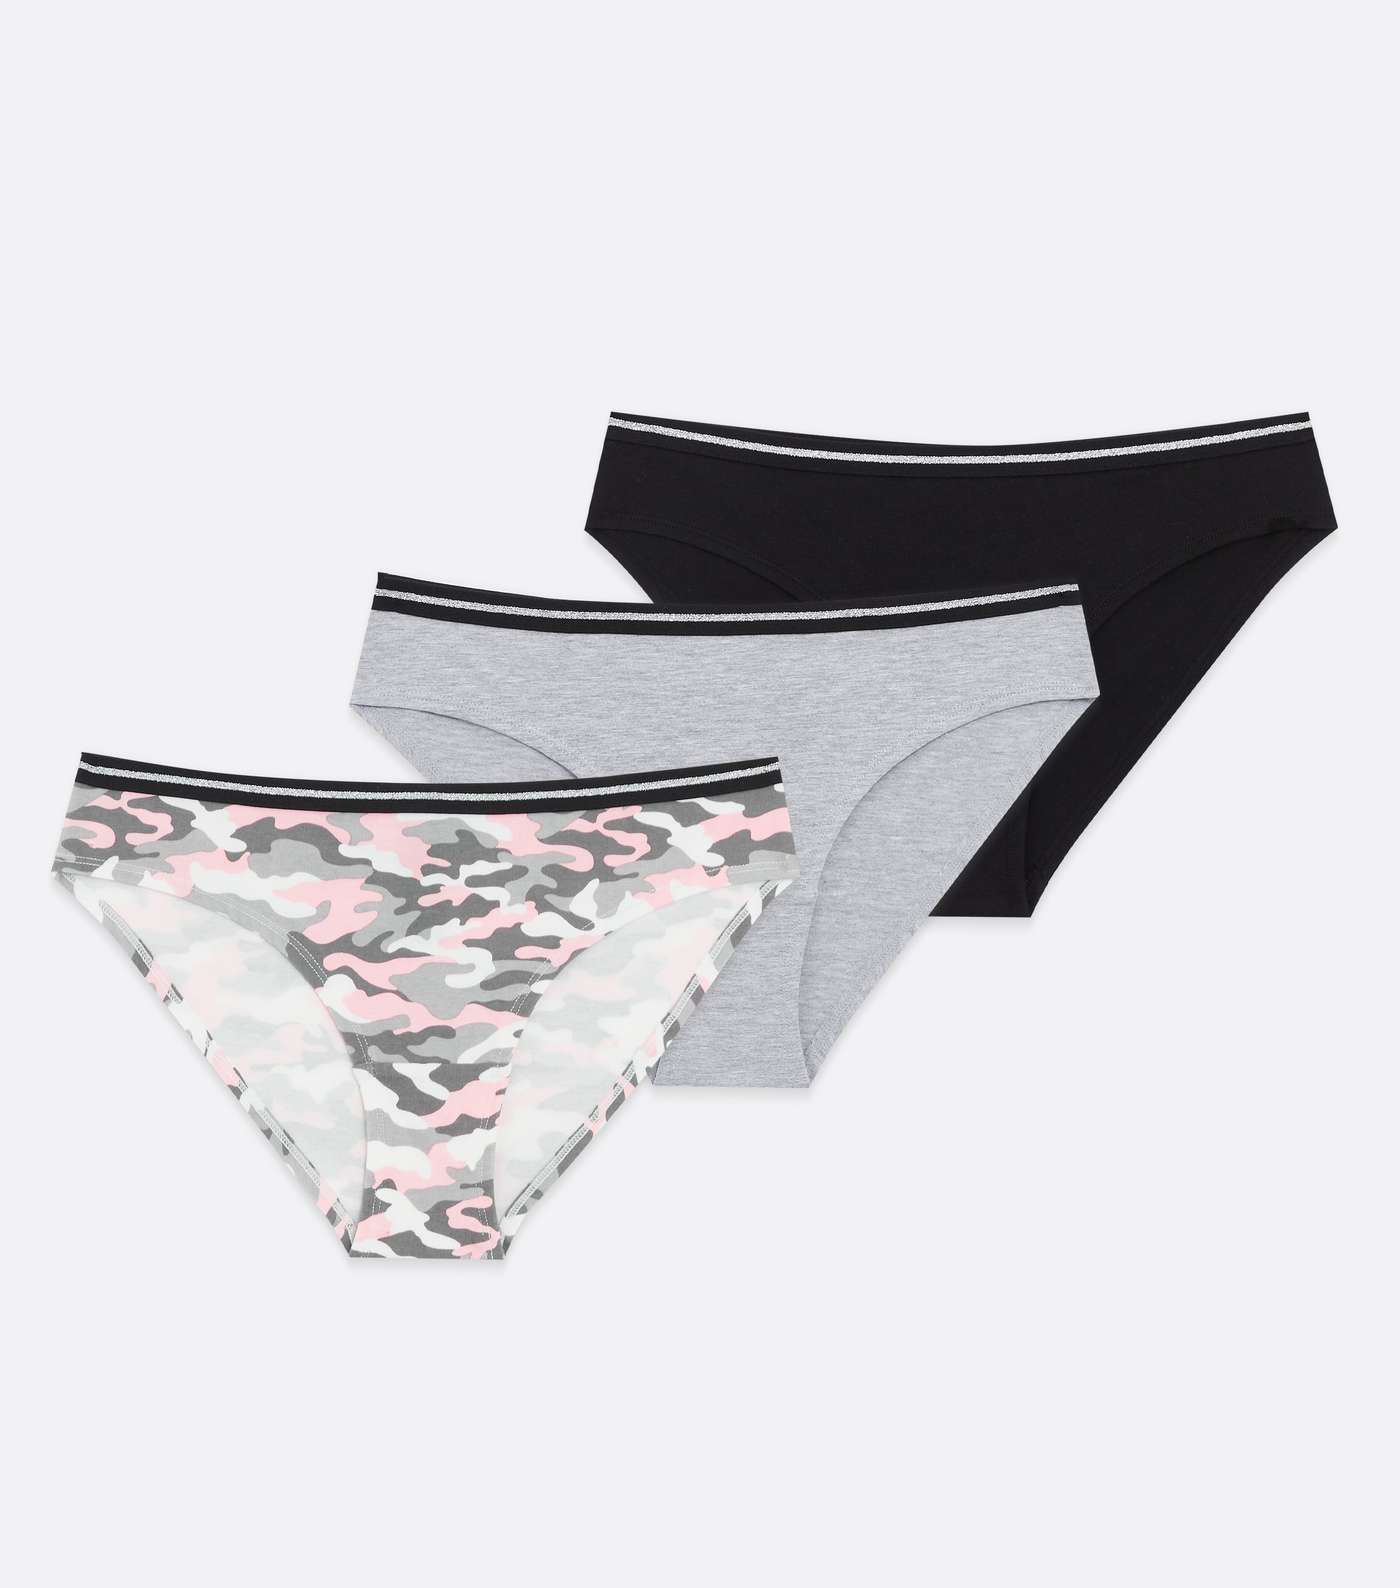 Girls 3 Pack Grey Black and Pink Camo Stripe Briefs Image 2